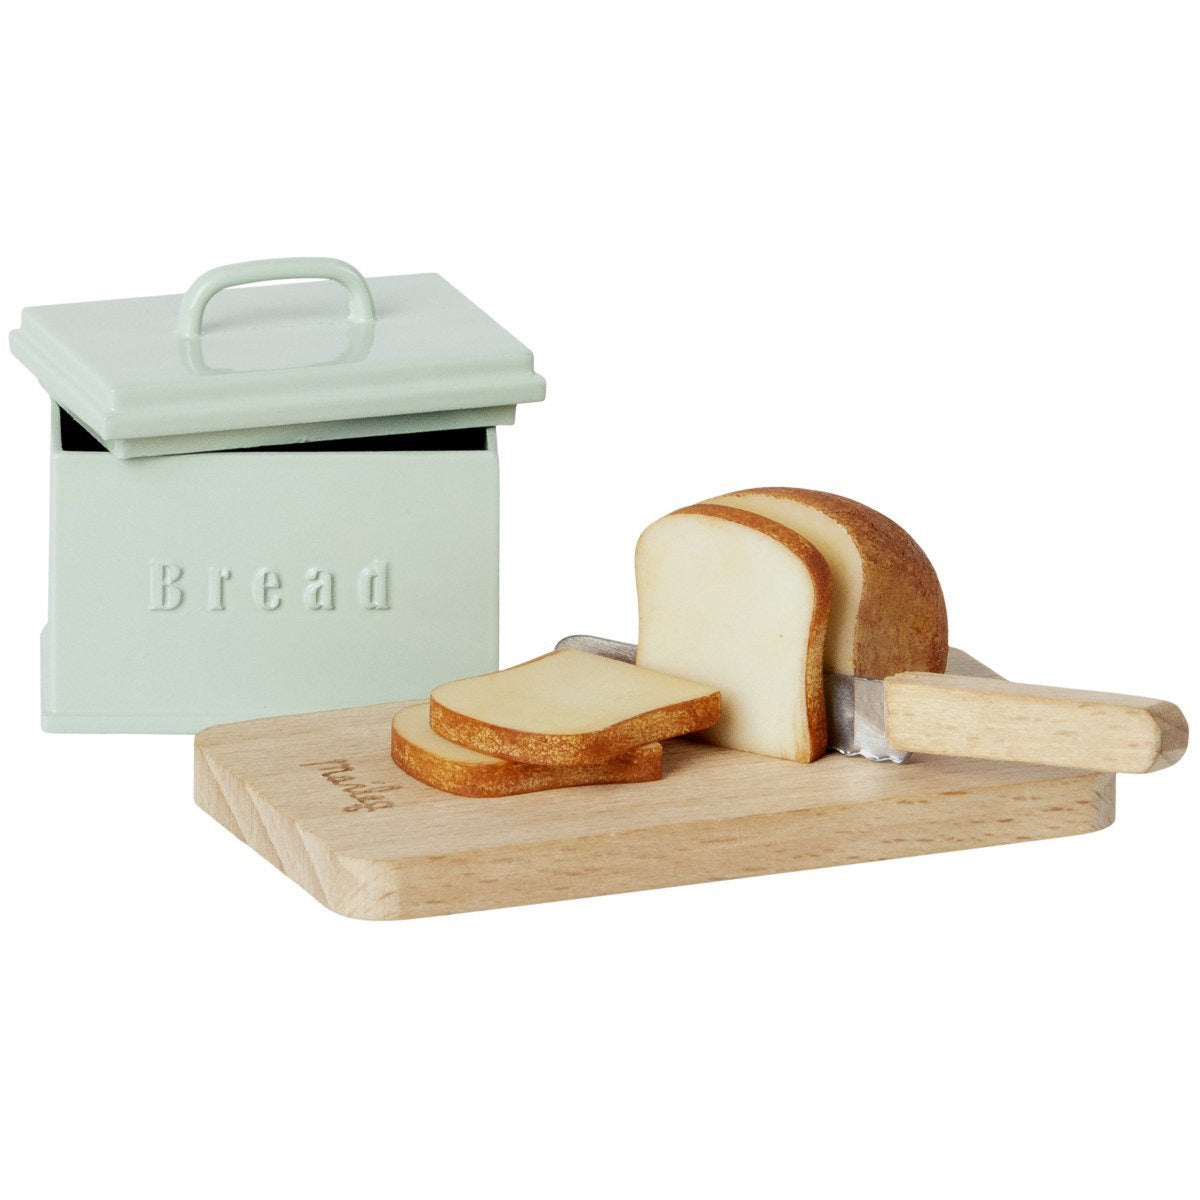 Erzi Wooden Play Food Loaf of Bread, Made in Germany – My Sweet Muffin